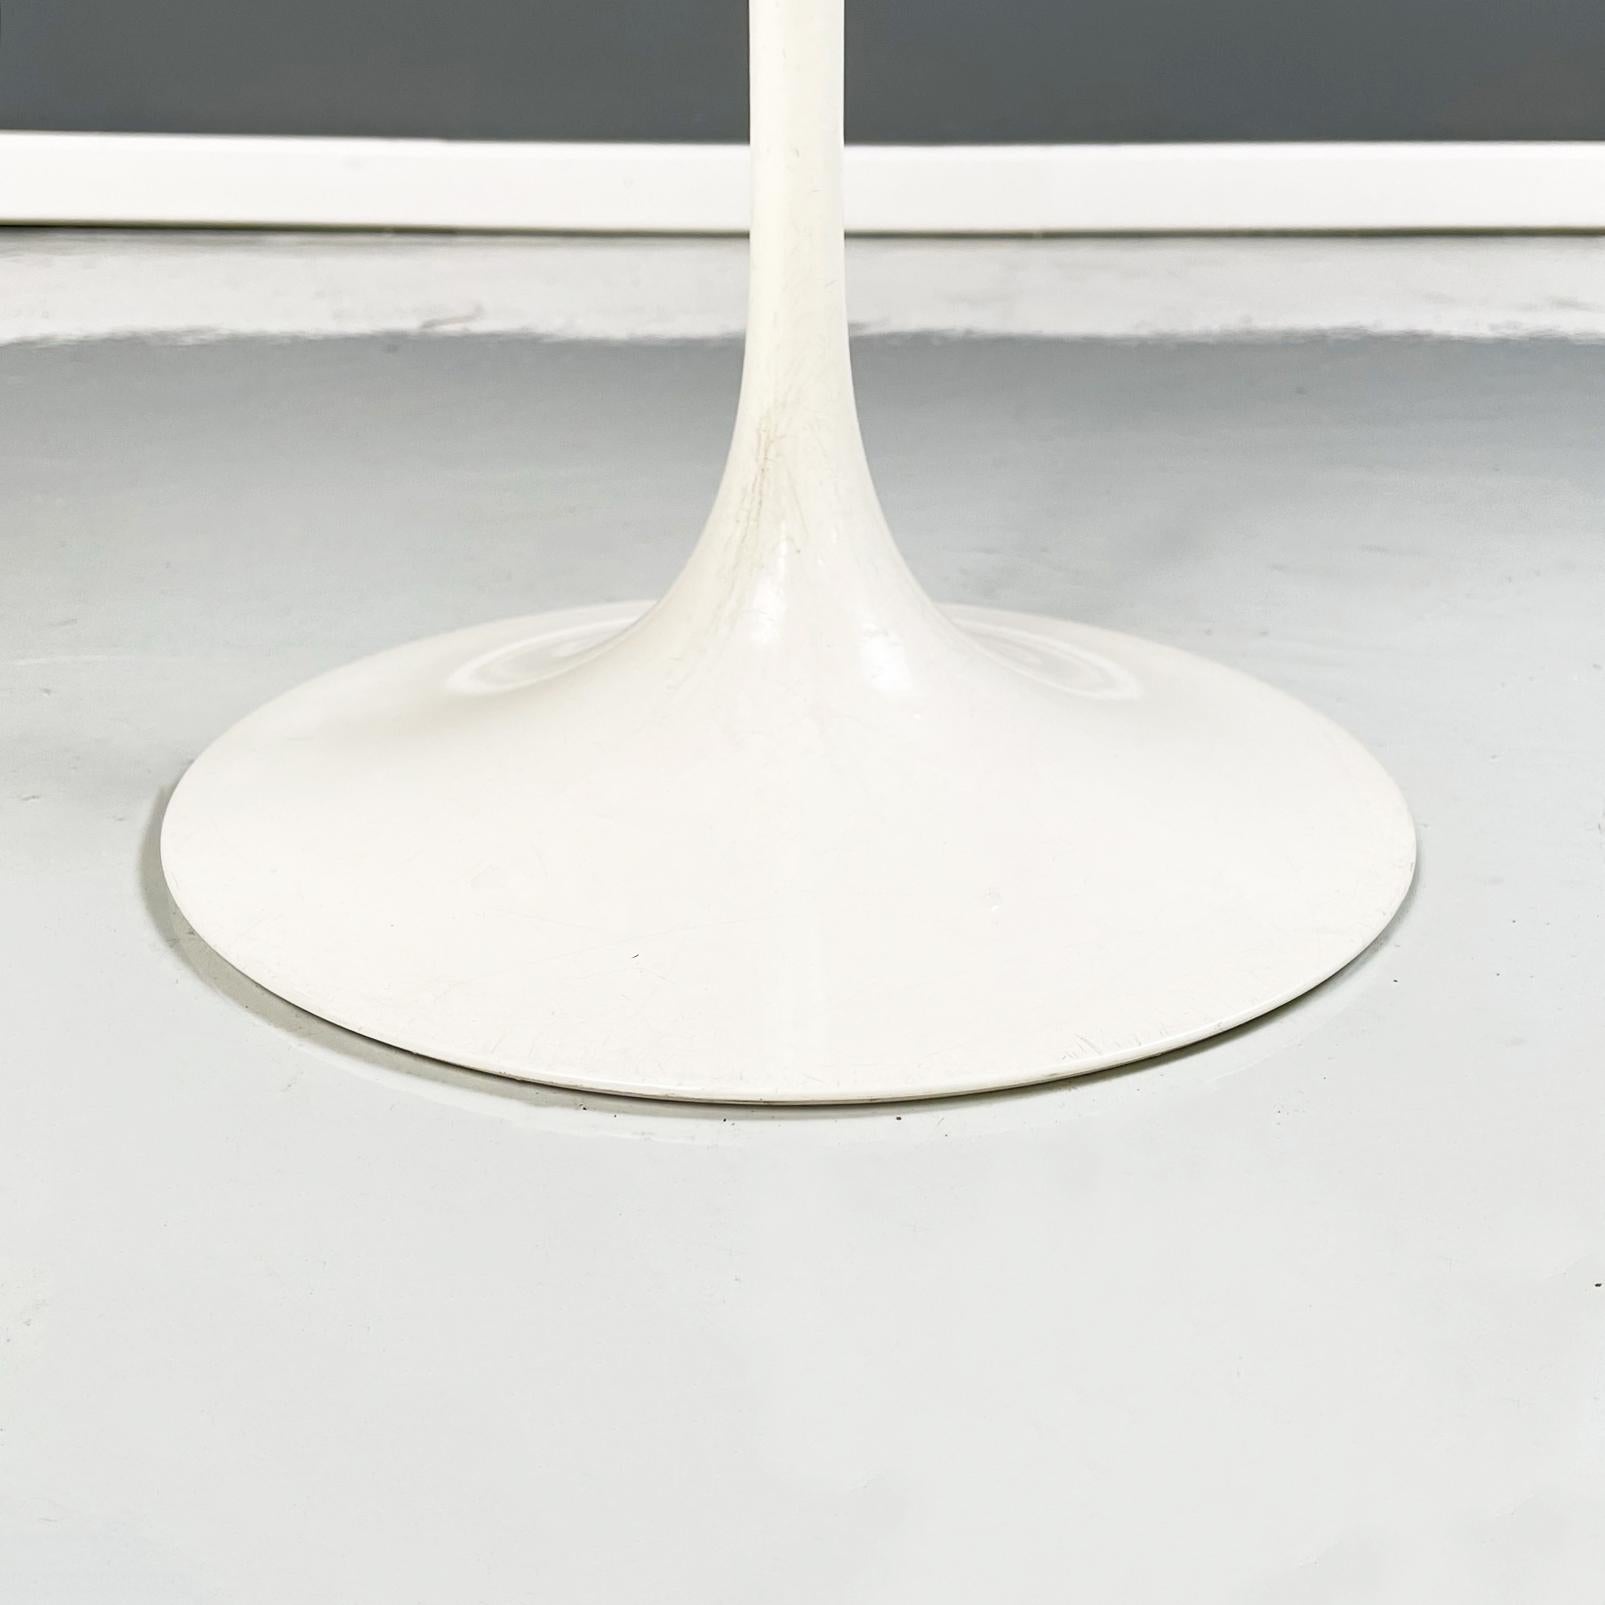 American Mid-Century White Laminate Metal Coffee Table Mod.Tulip by Knoll, 1960s For Sale 4